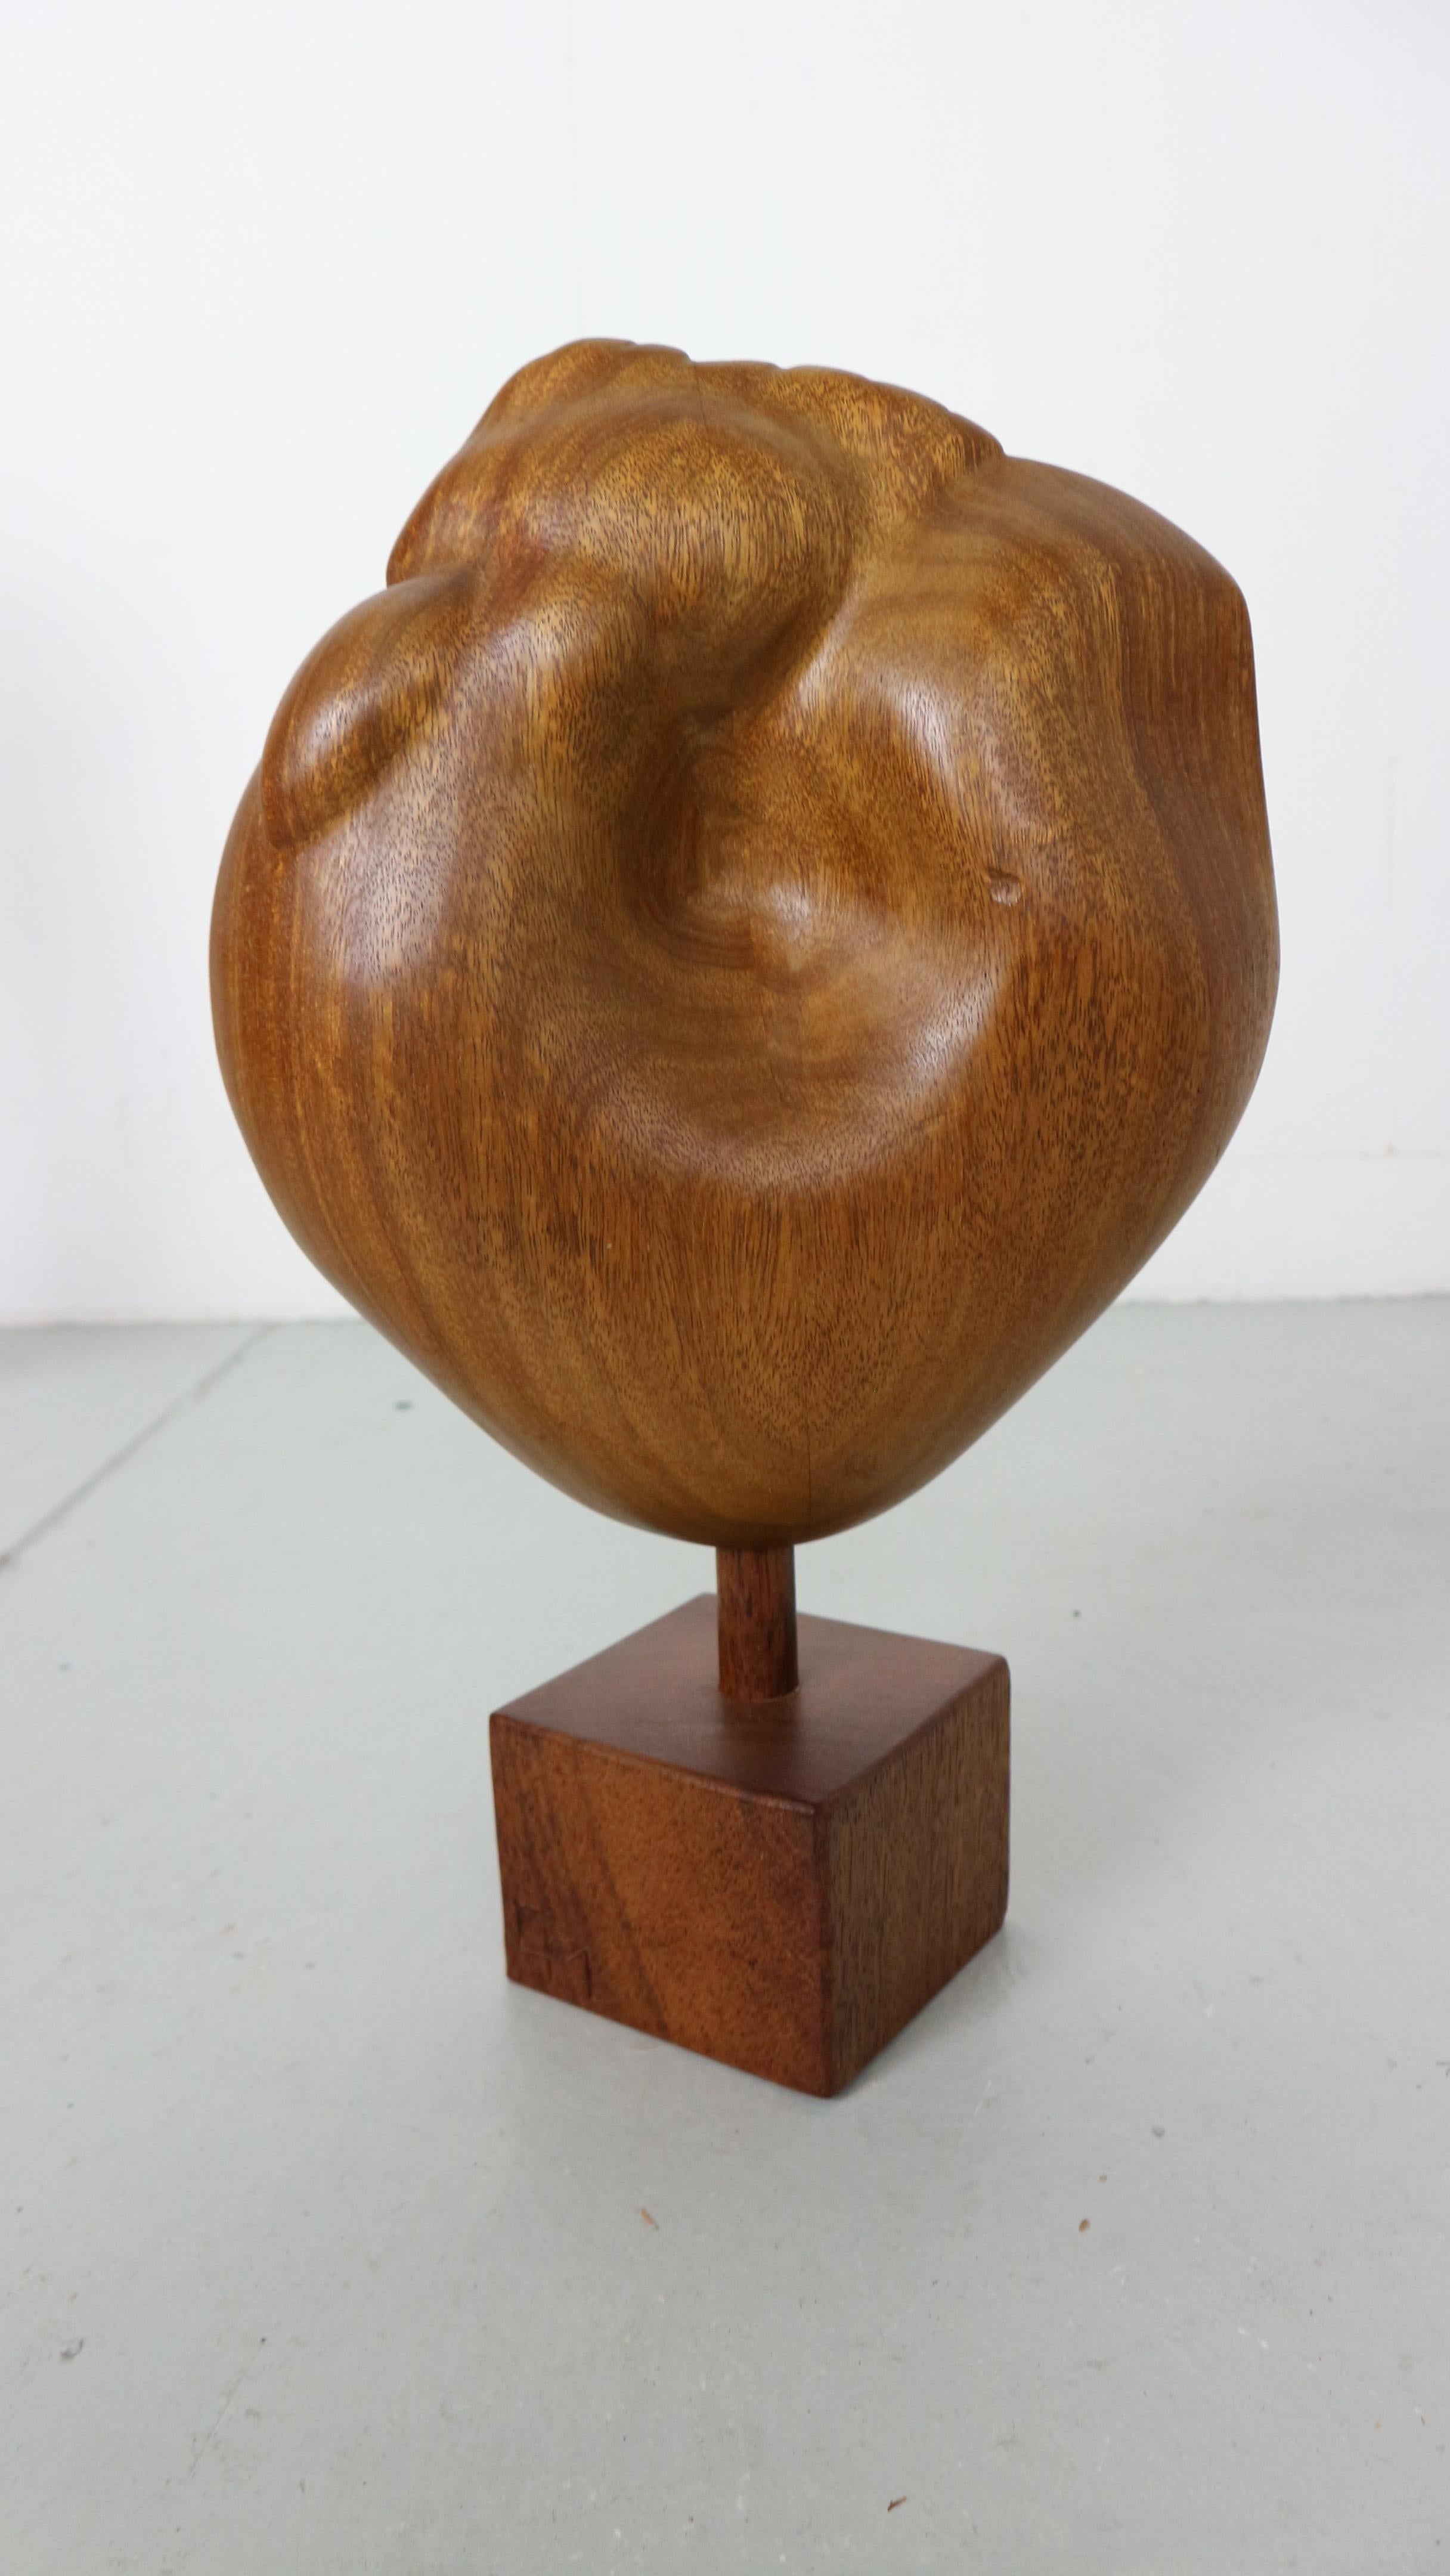 organically shaped wood sculpture 1950s Netherlands, Rooster 6